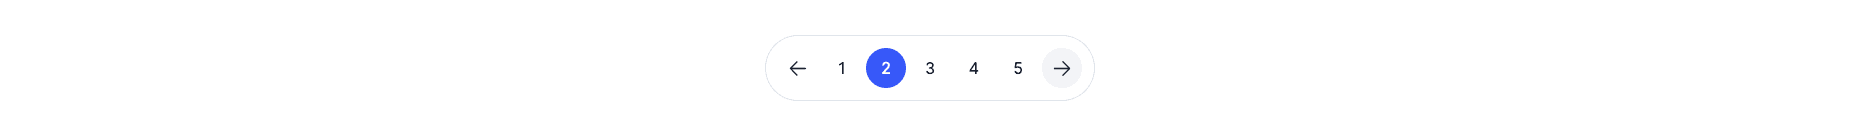 Pagination Style 4